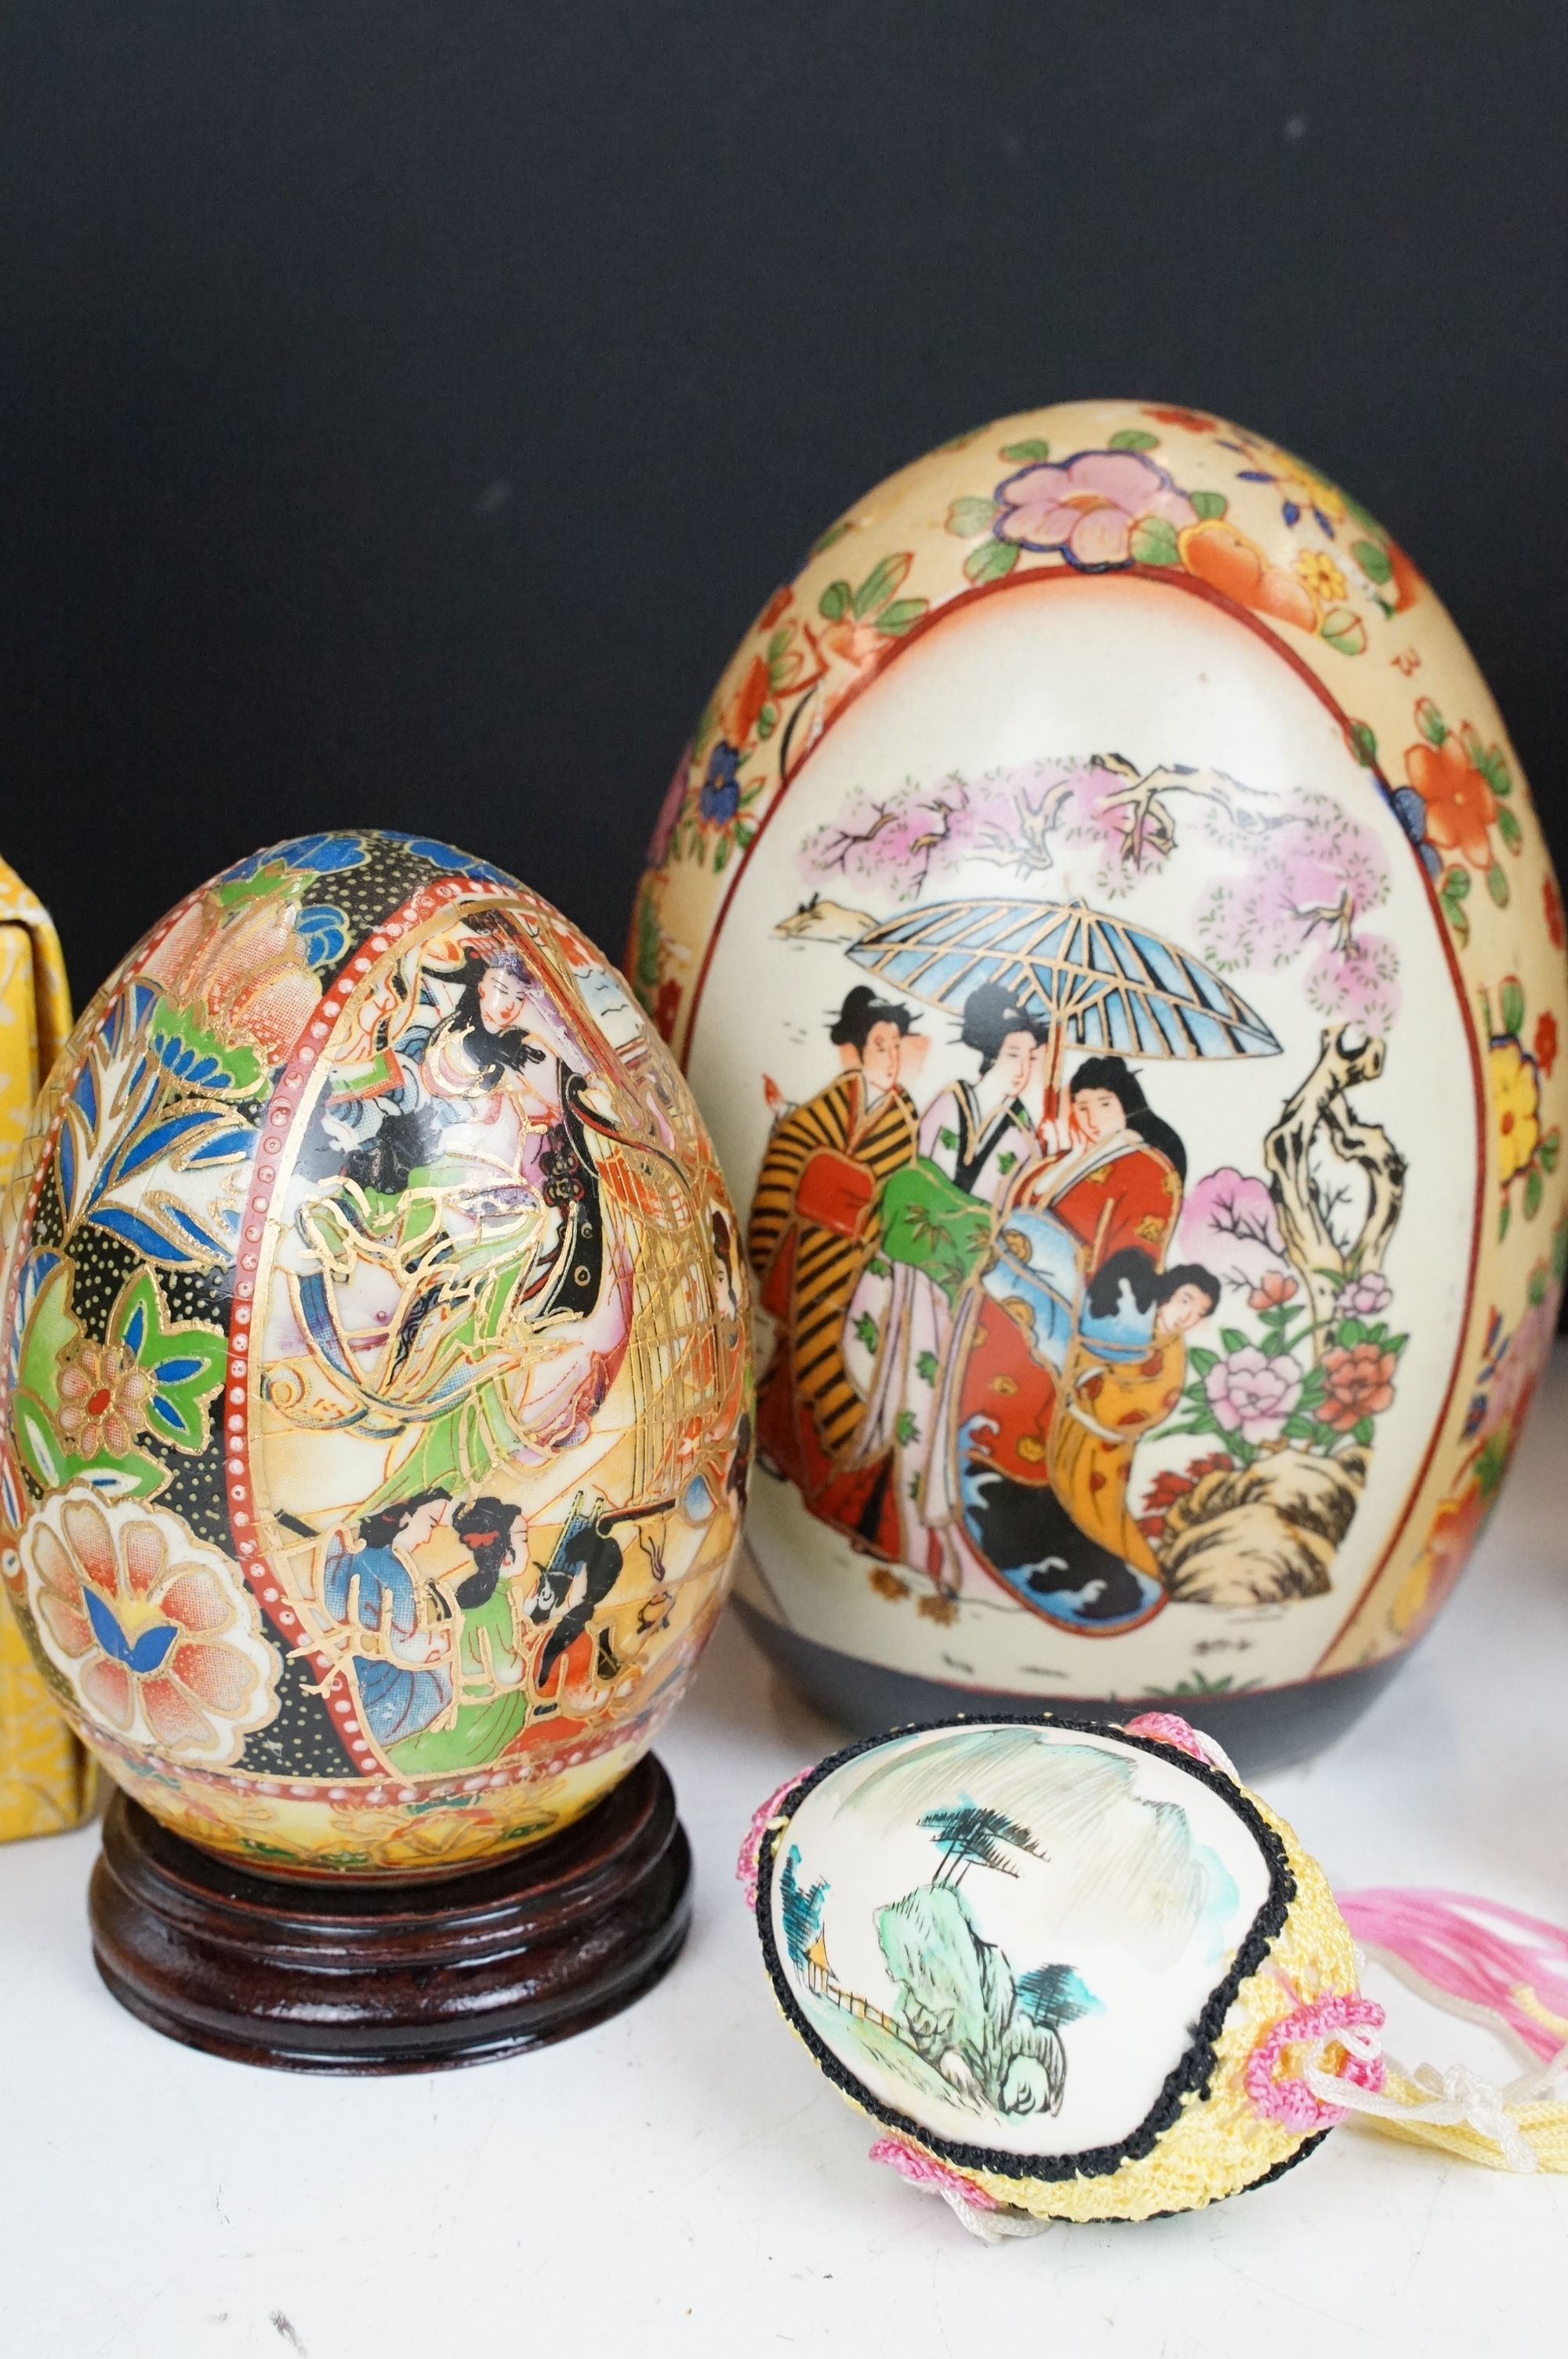 Collection of Chinese painted eggs including some in small display cases, and some ceramic examples. - Image 3 of 6